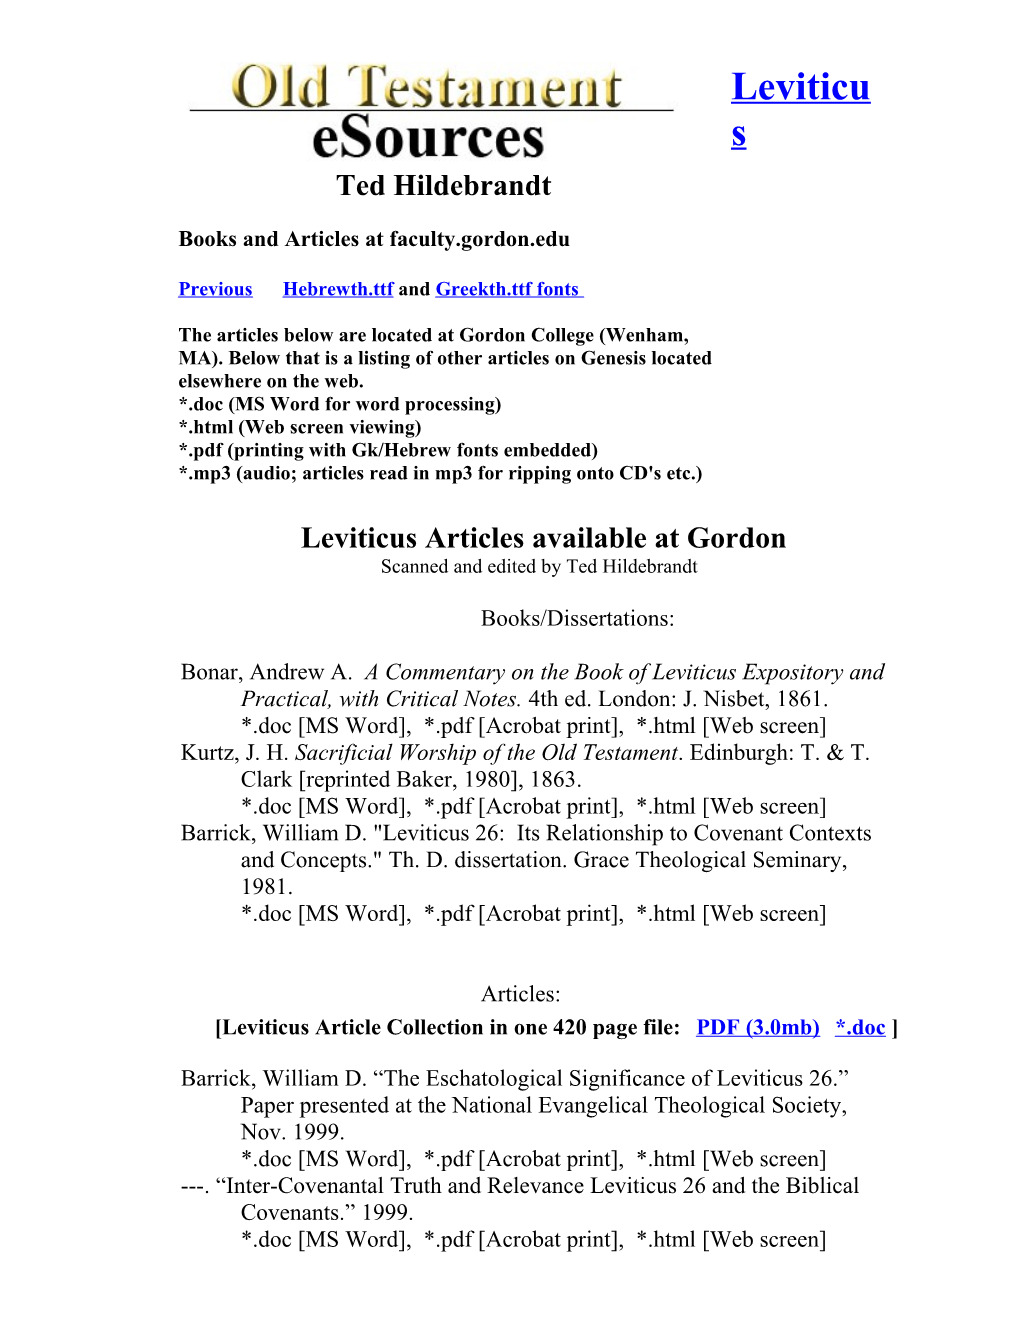 Leviticus Articles Available at Gordon